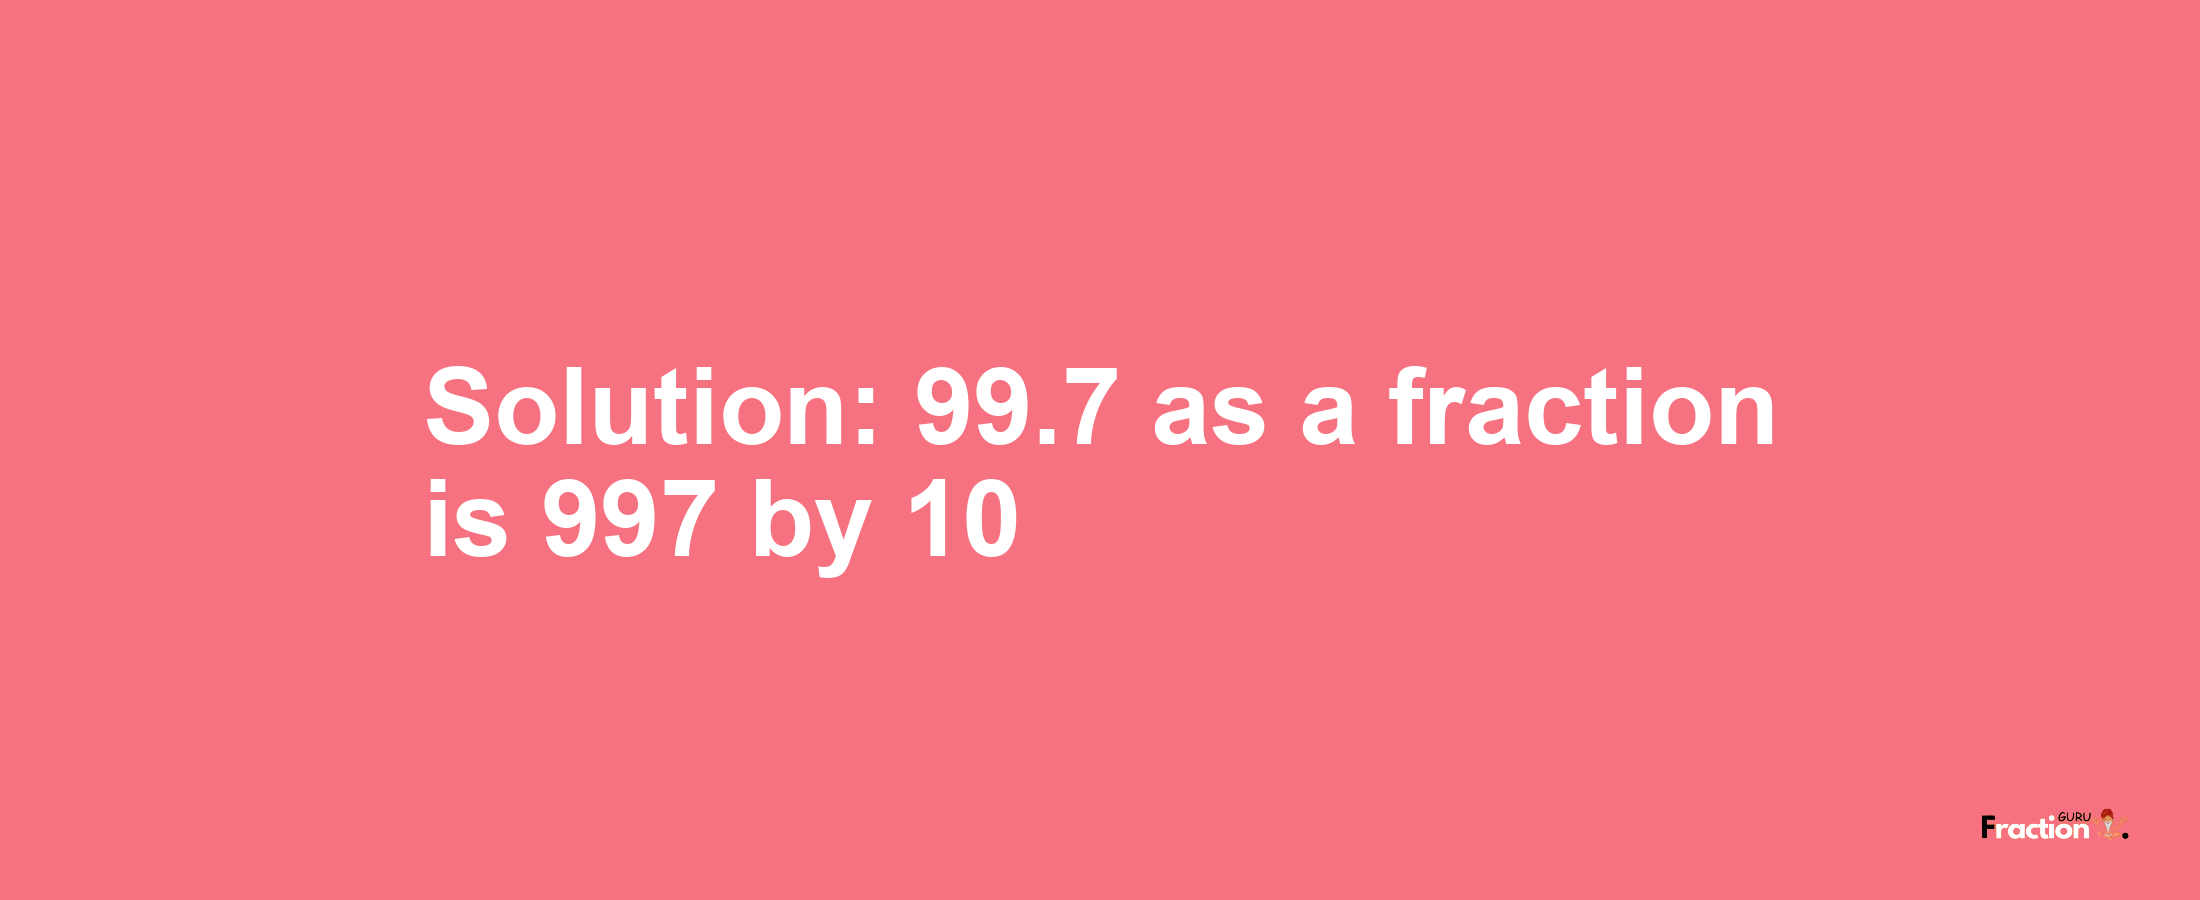 Solution:99.7 as a fraction is 997/10